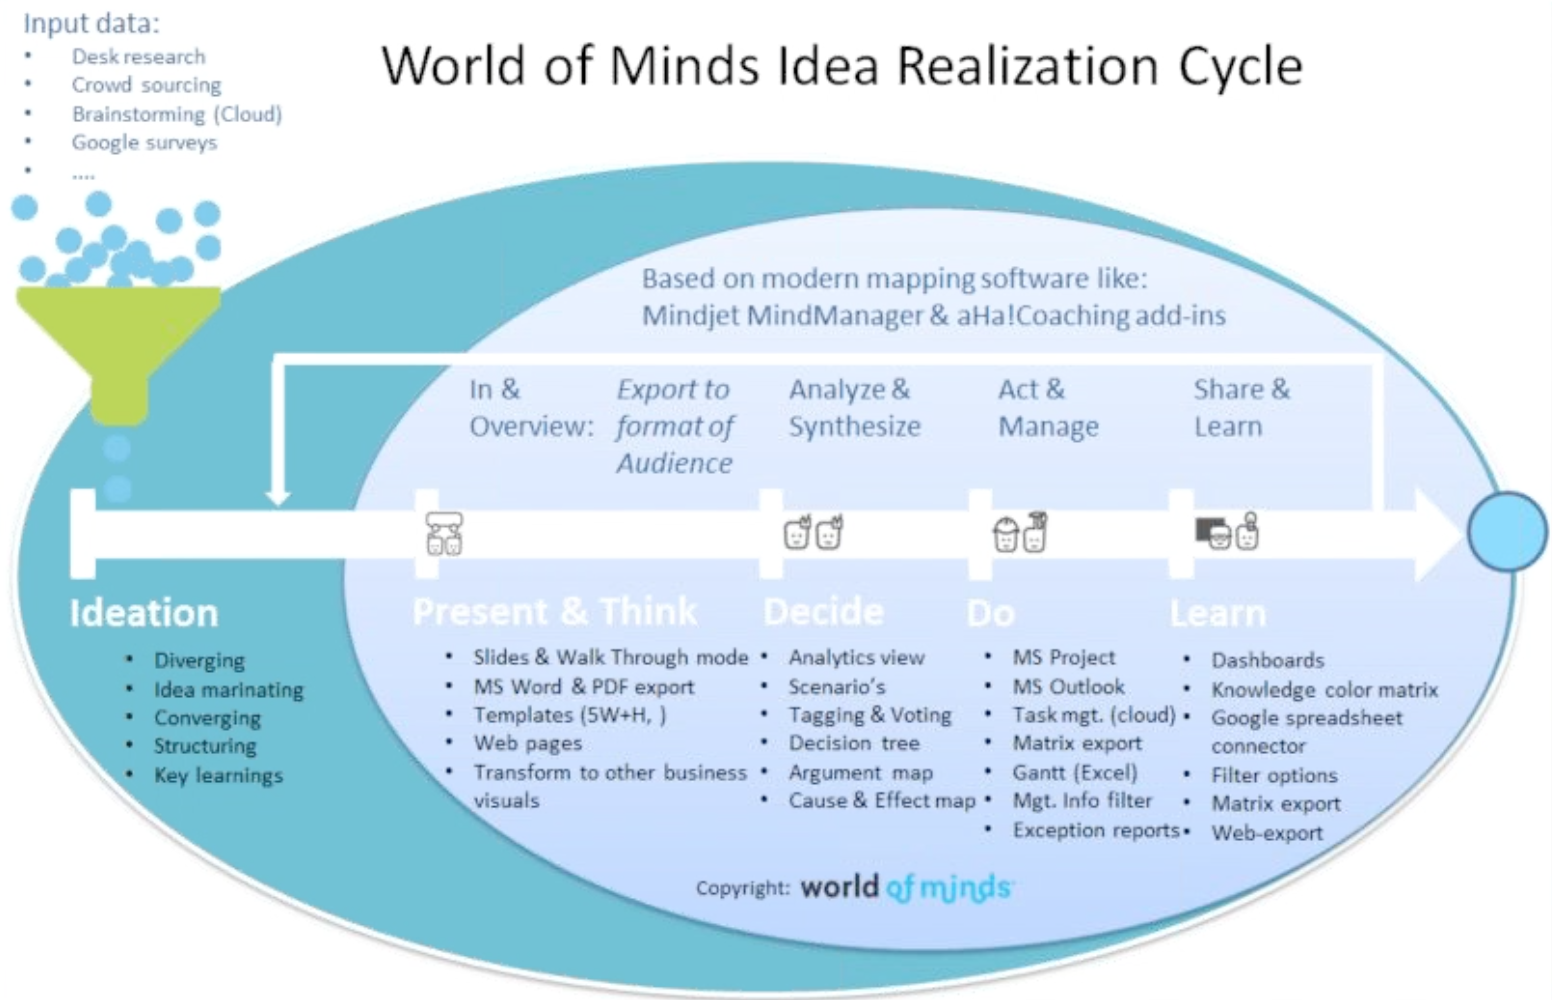 Implementing new smarter ways of working with MindManager